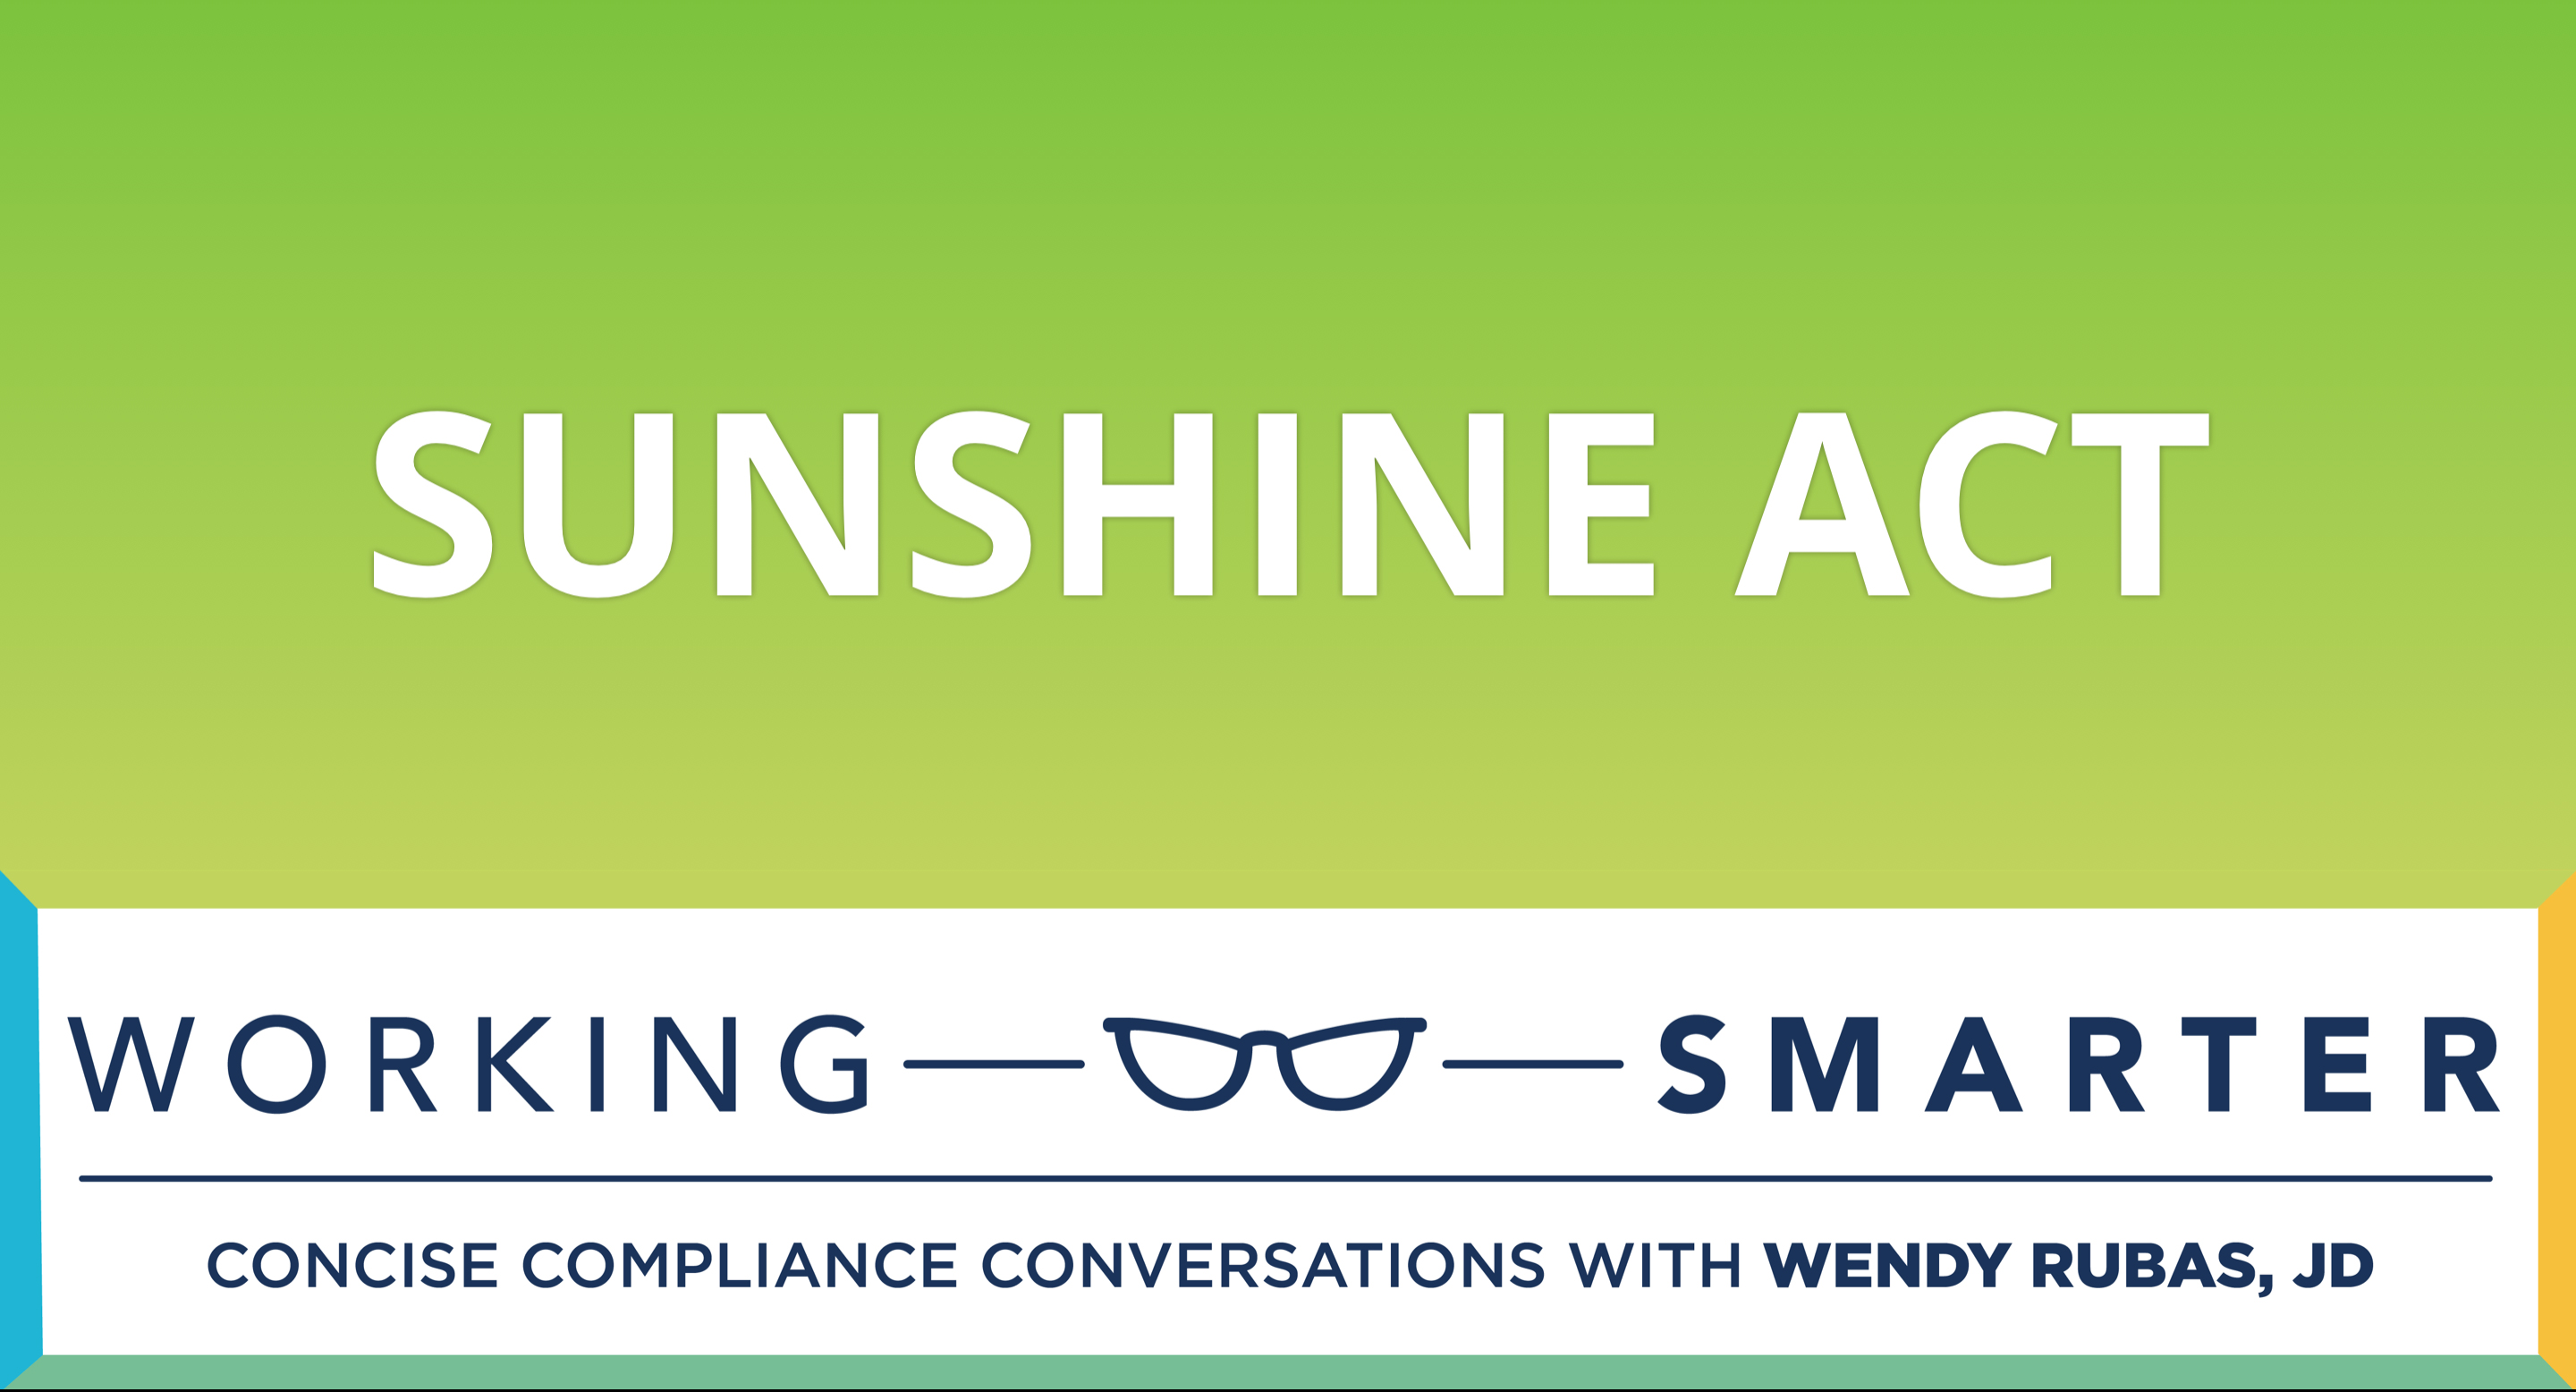 Working Smarter: Shining a Light on the Sunshine Act